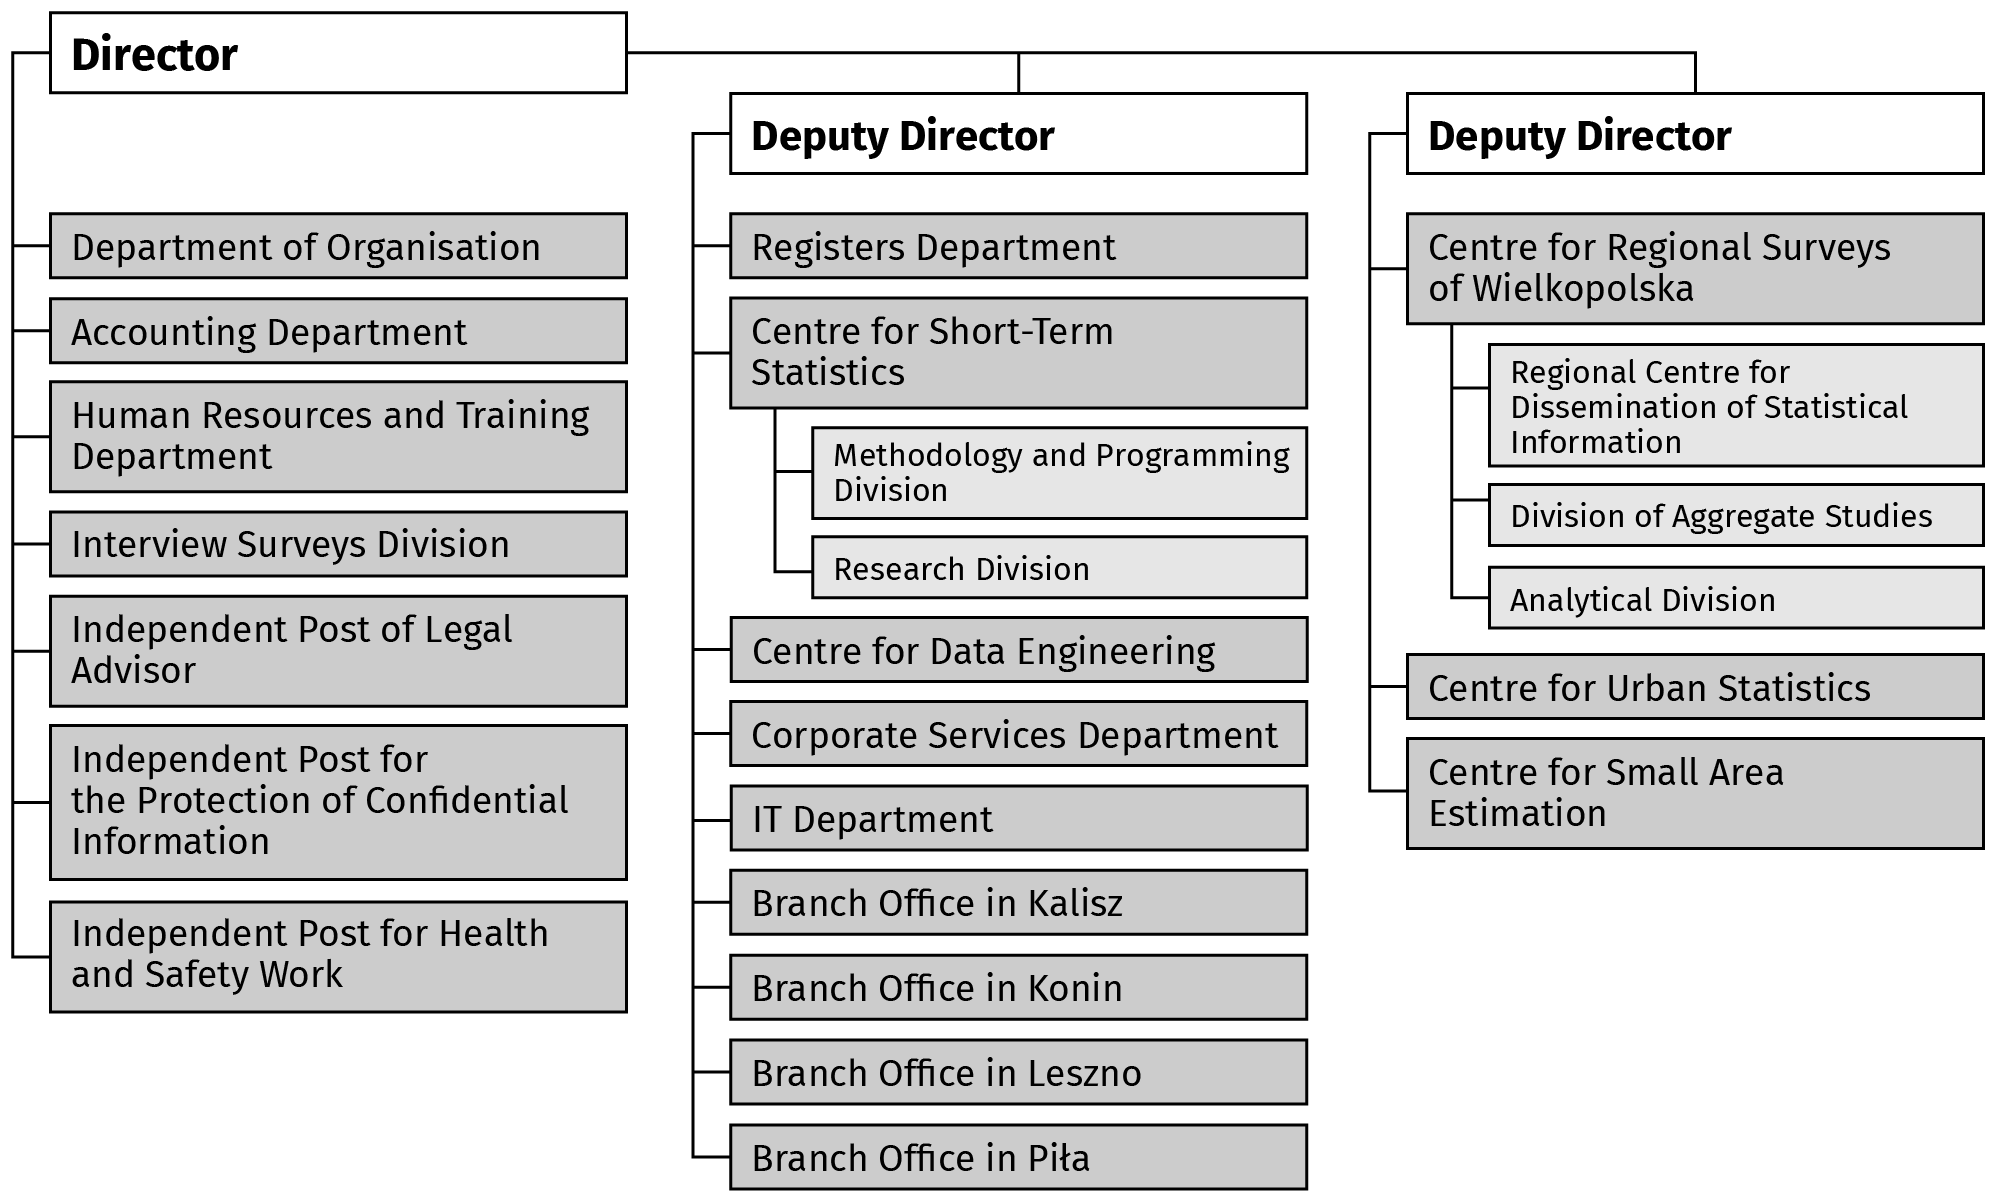 Organizational structure of the Statistical Office in Poznan